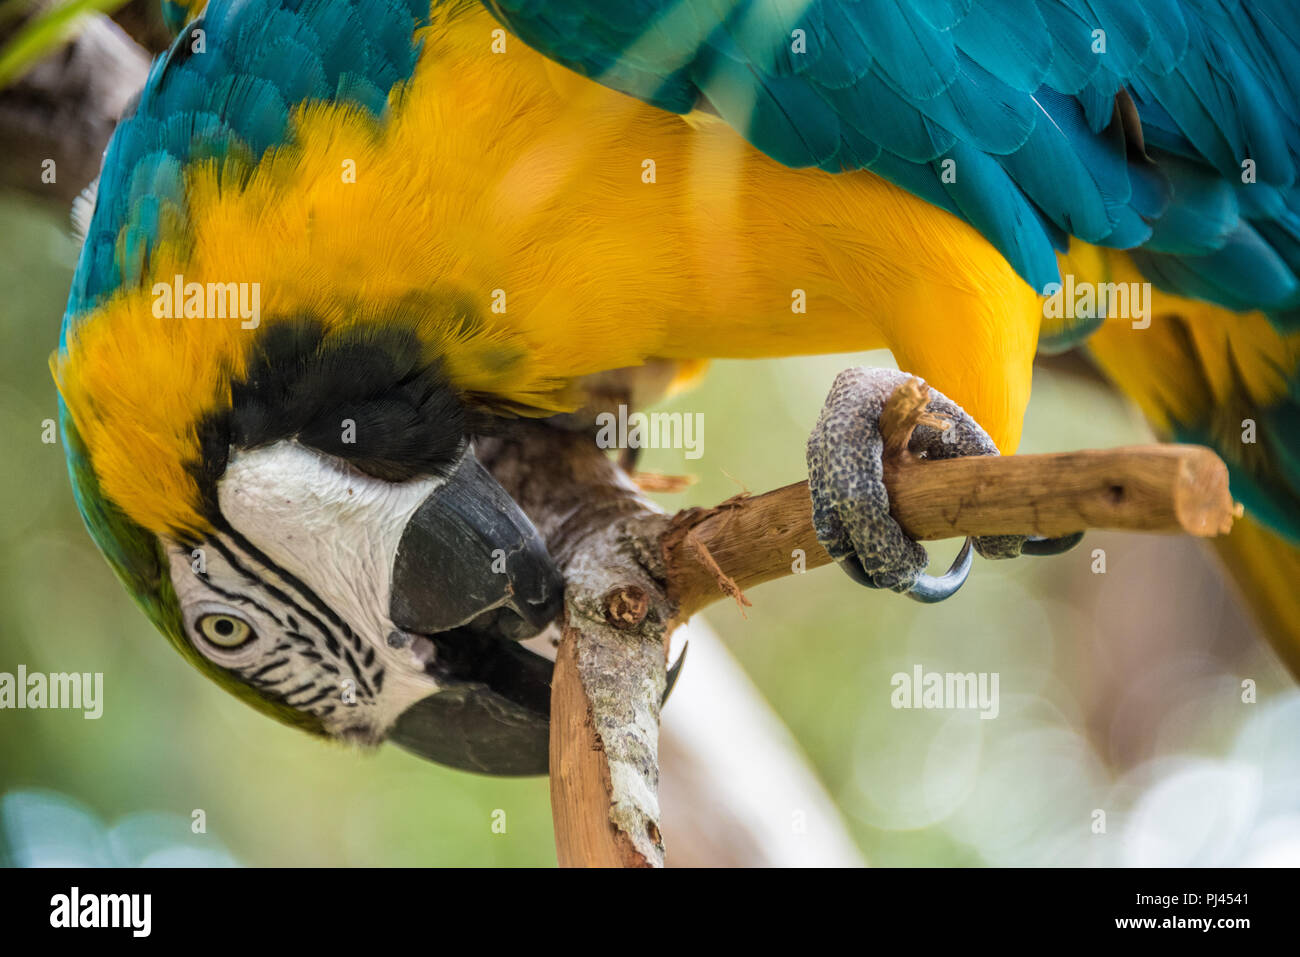 Blue-and-yellow macaw (also known as a blue-and-gold macaw) at the St. Augustine Alligator Farm Zoological Park in St. Augustine, FL. (USA) Stock Photo